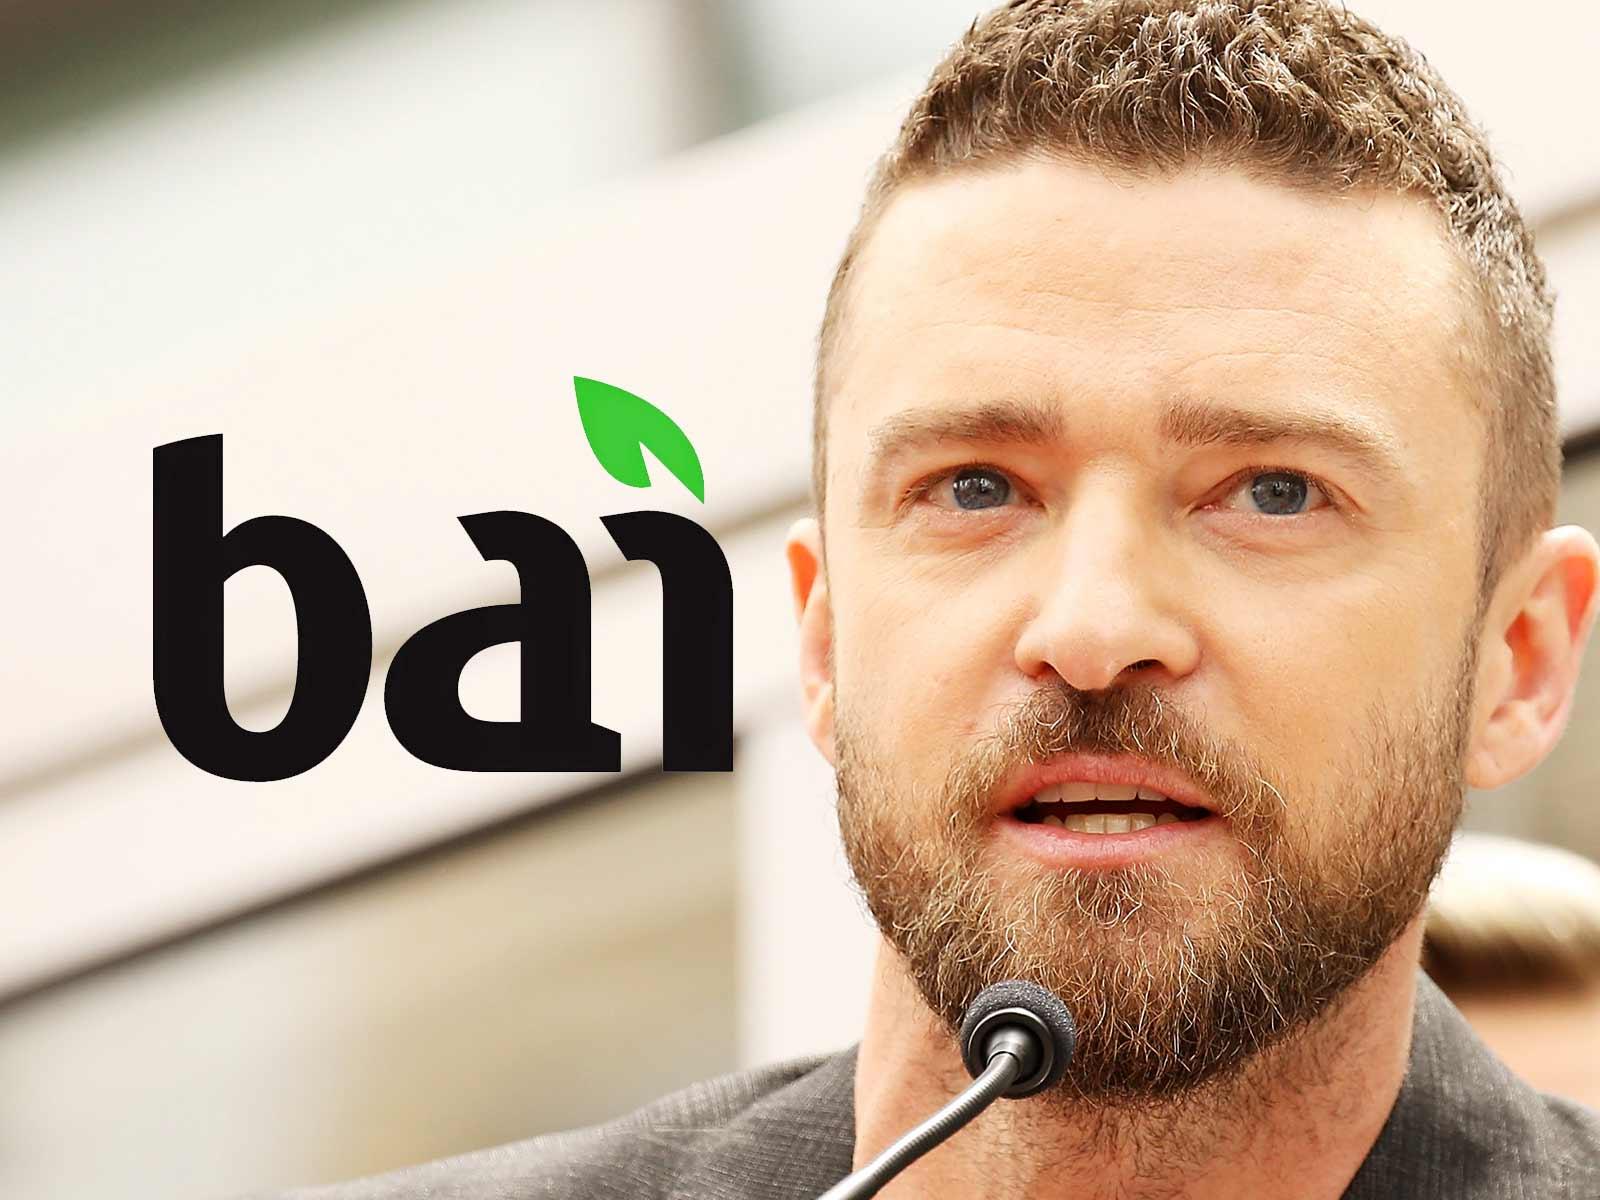 Justin Timberlake Wants Bai Brands Lawsuit Dismissed: Don’t Look at Me, I’m Just the Spokesman!